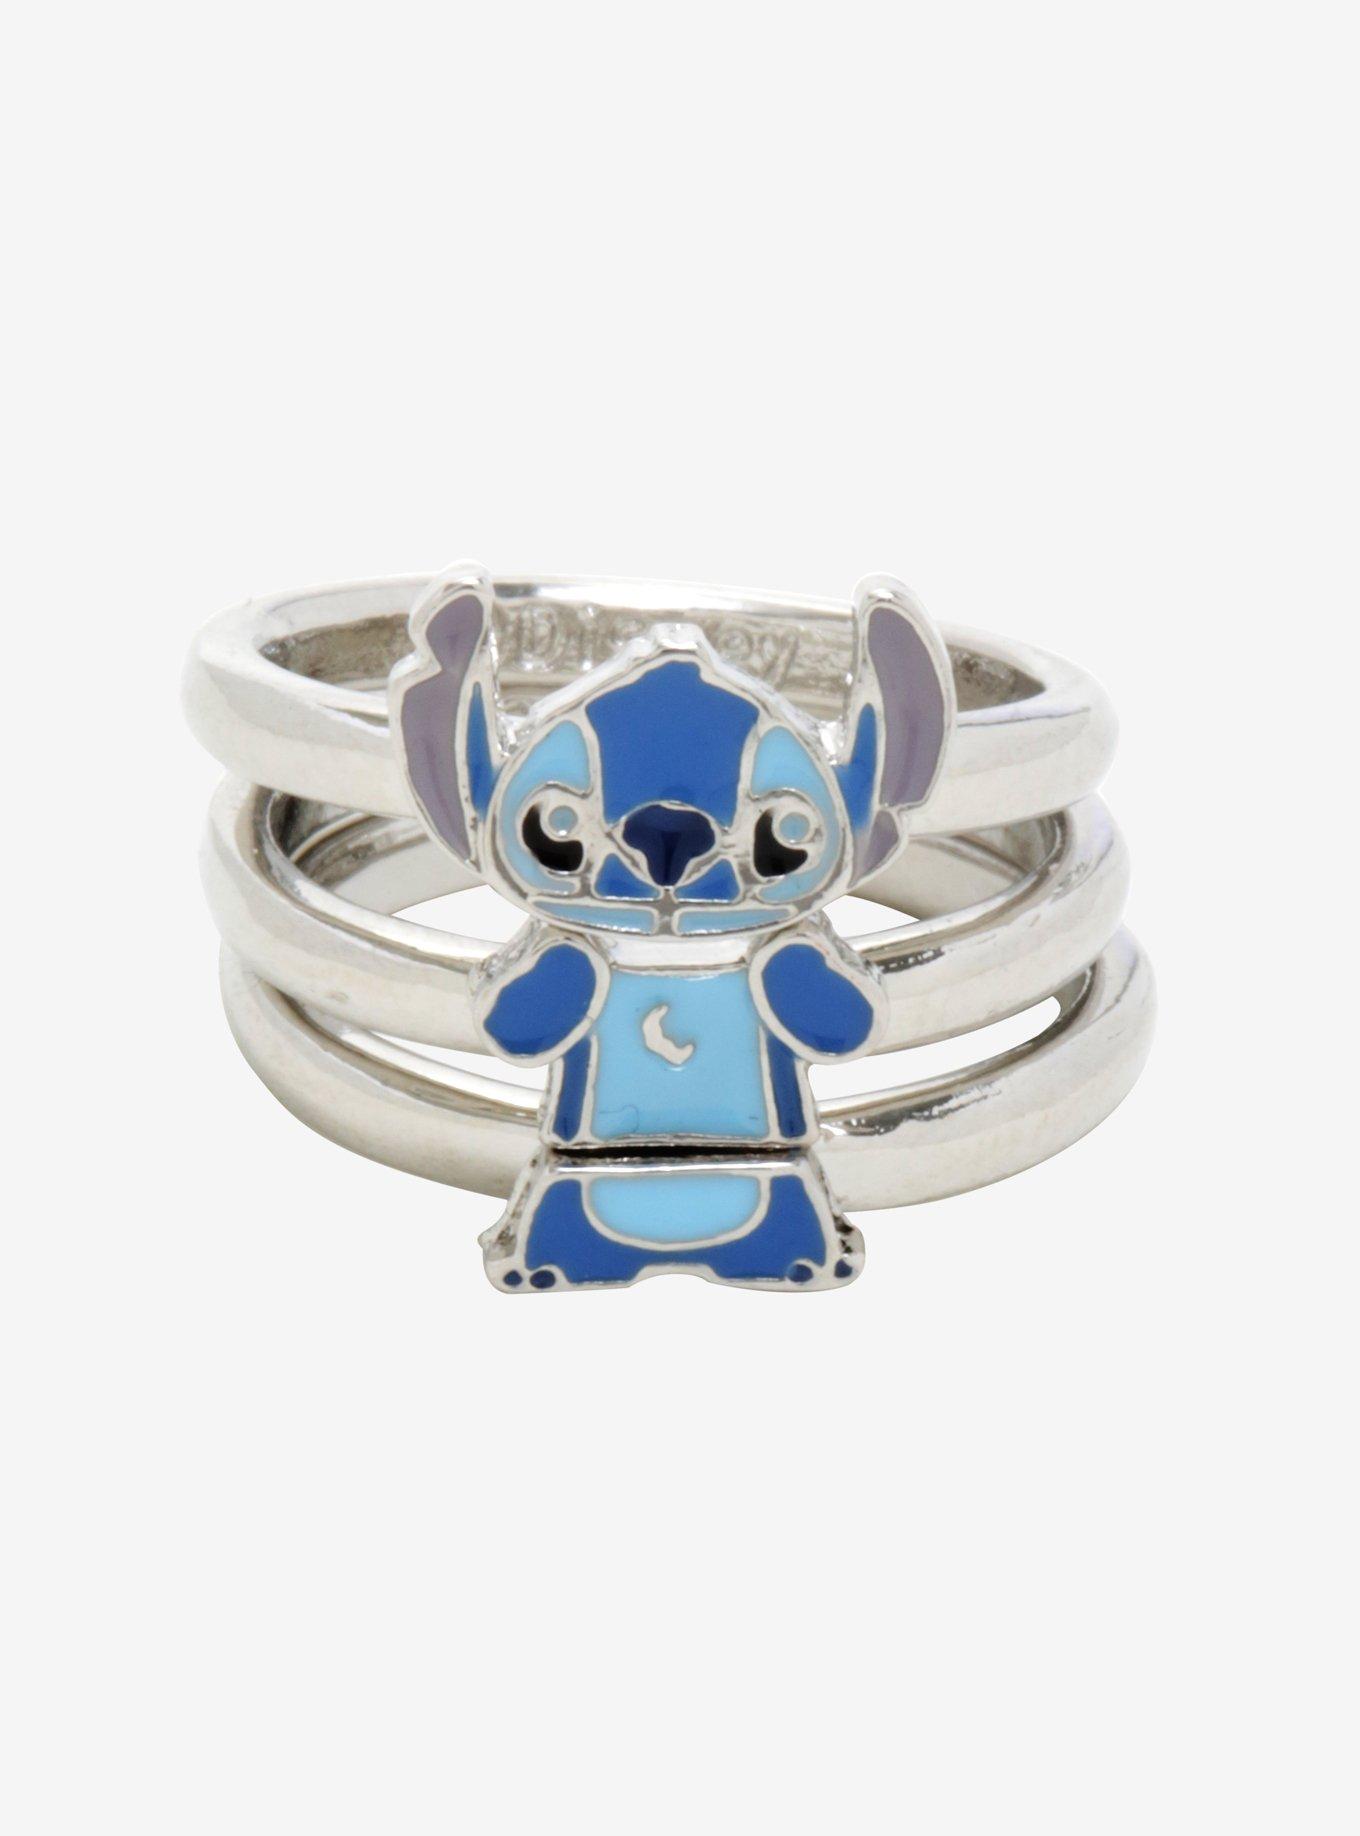 Disney Lilo & Stitch Blue & Pink Gold Plated Clear Stone Ring